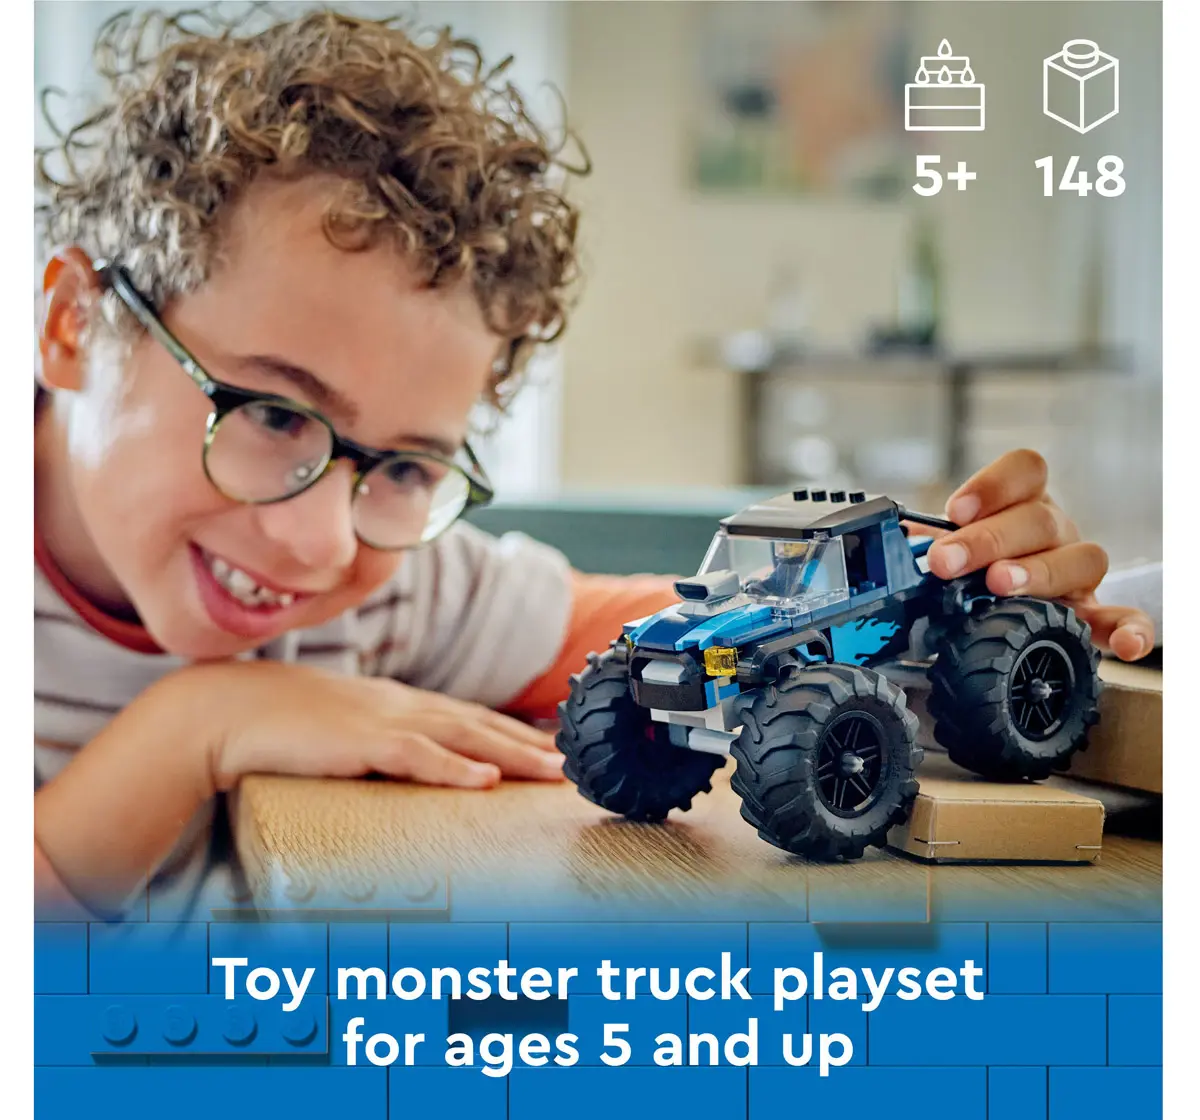 Lego City Blue Monster Truck Off-Road Toy 60402 Multicolour For Kids Ages 5Y+ (148 Pieces)